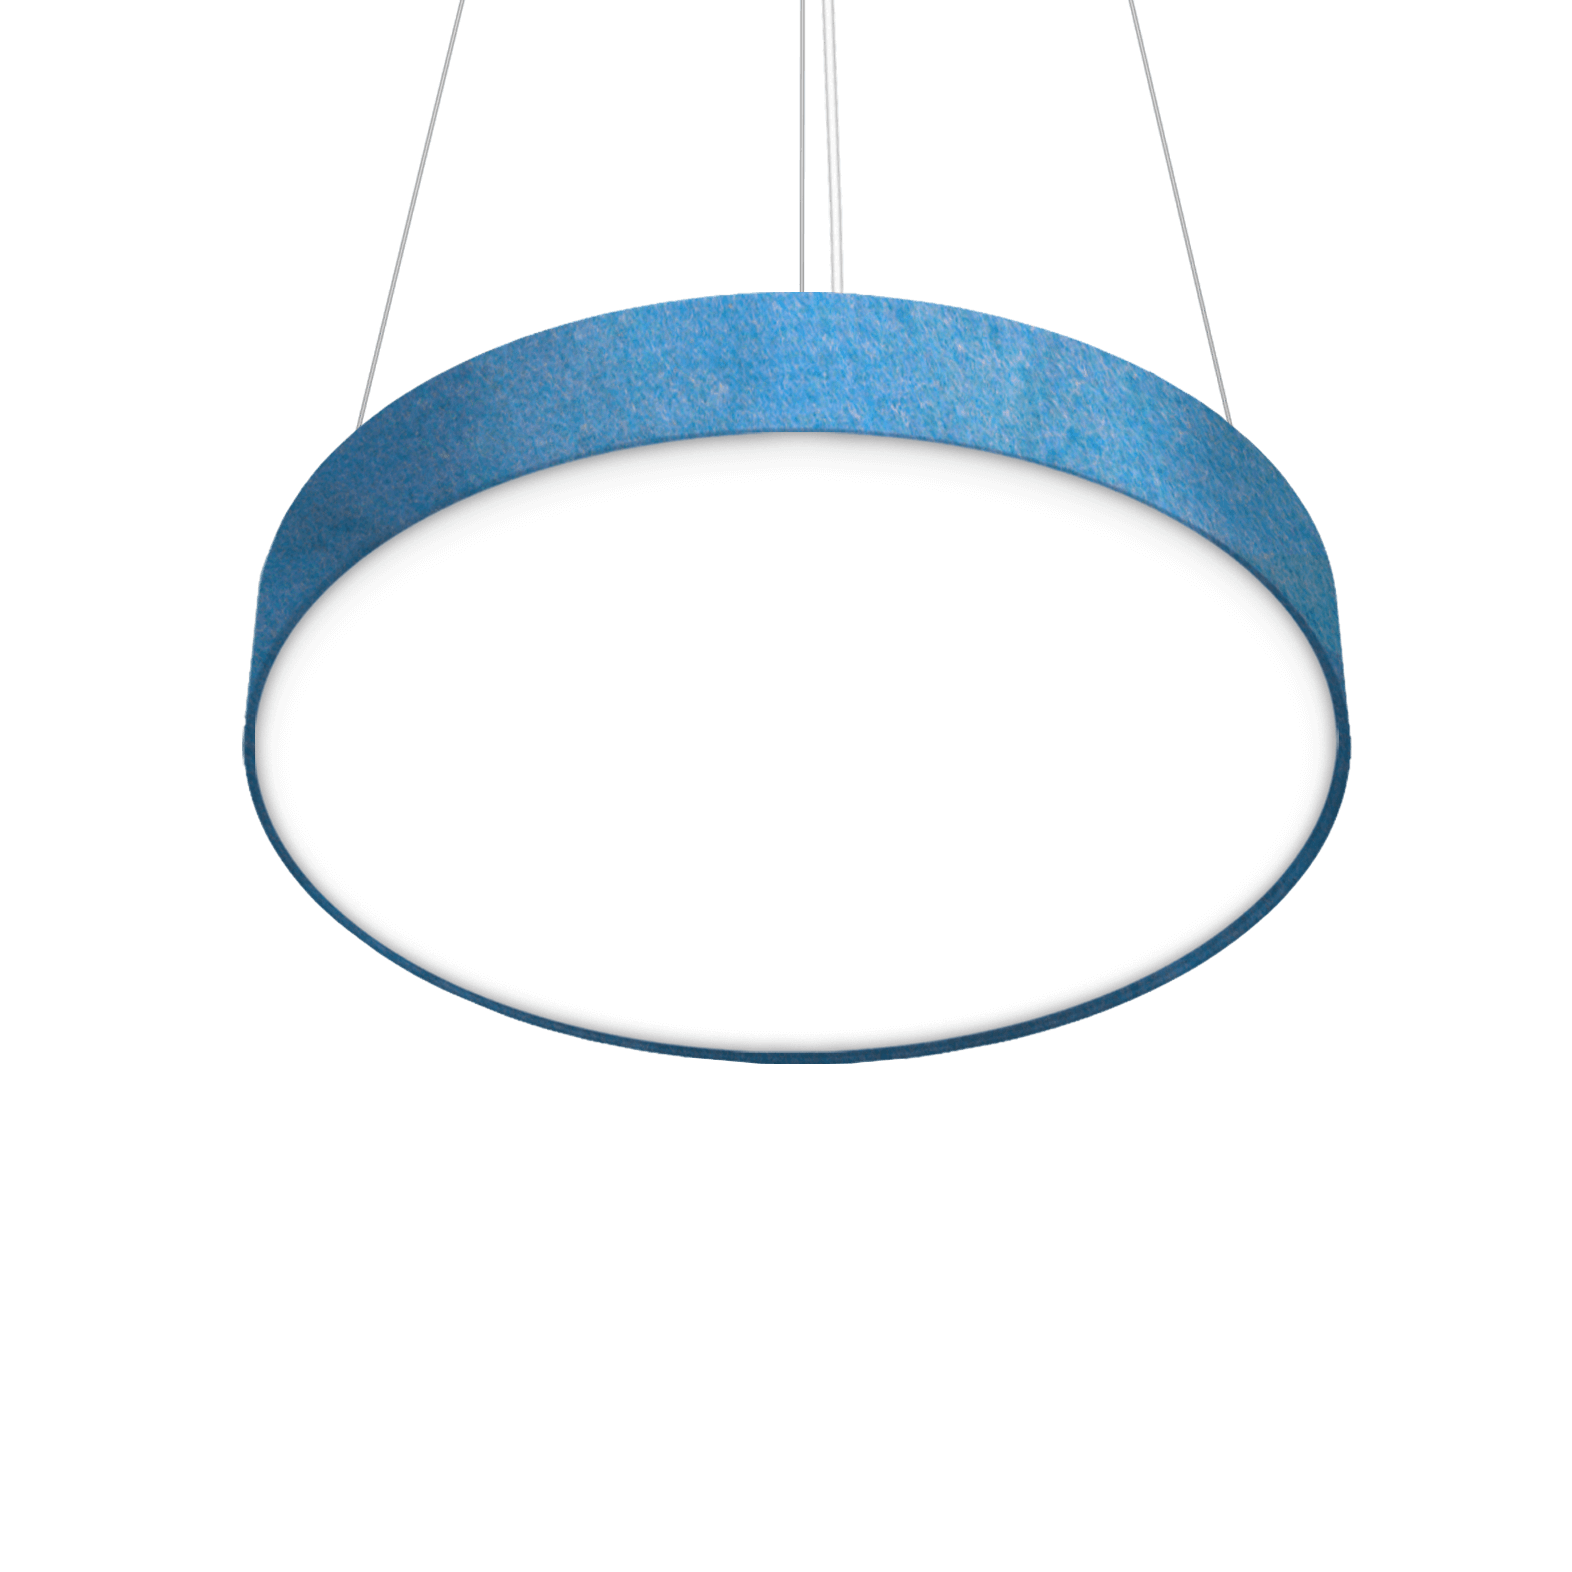 round circular pendant fixture with blue felt applied to the body